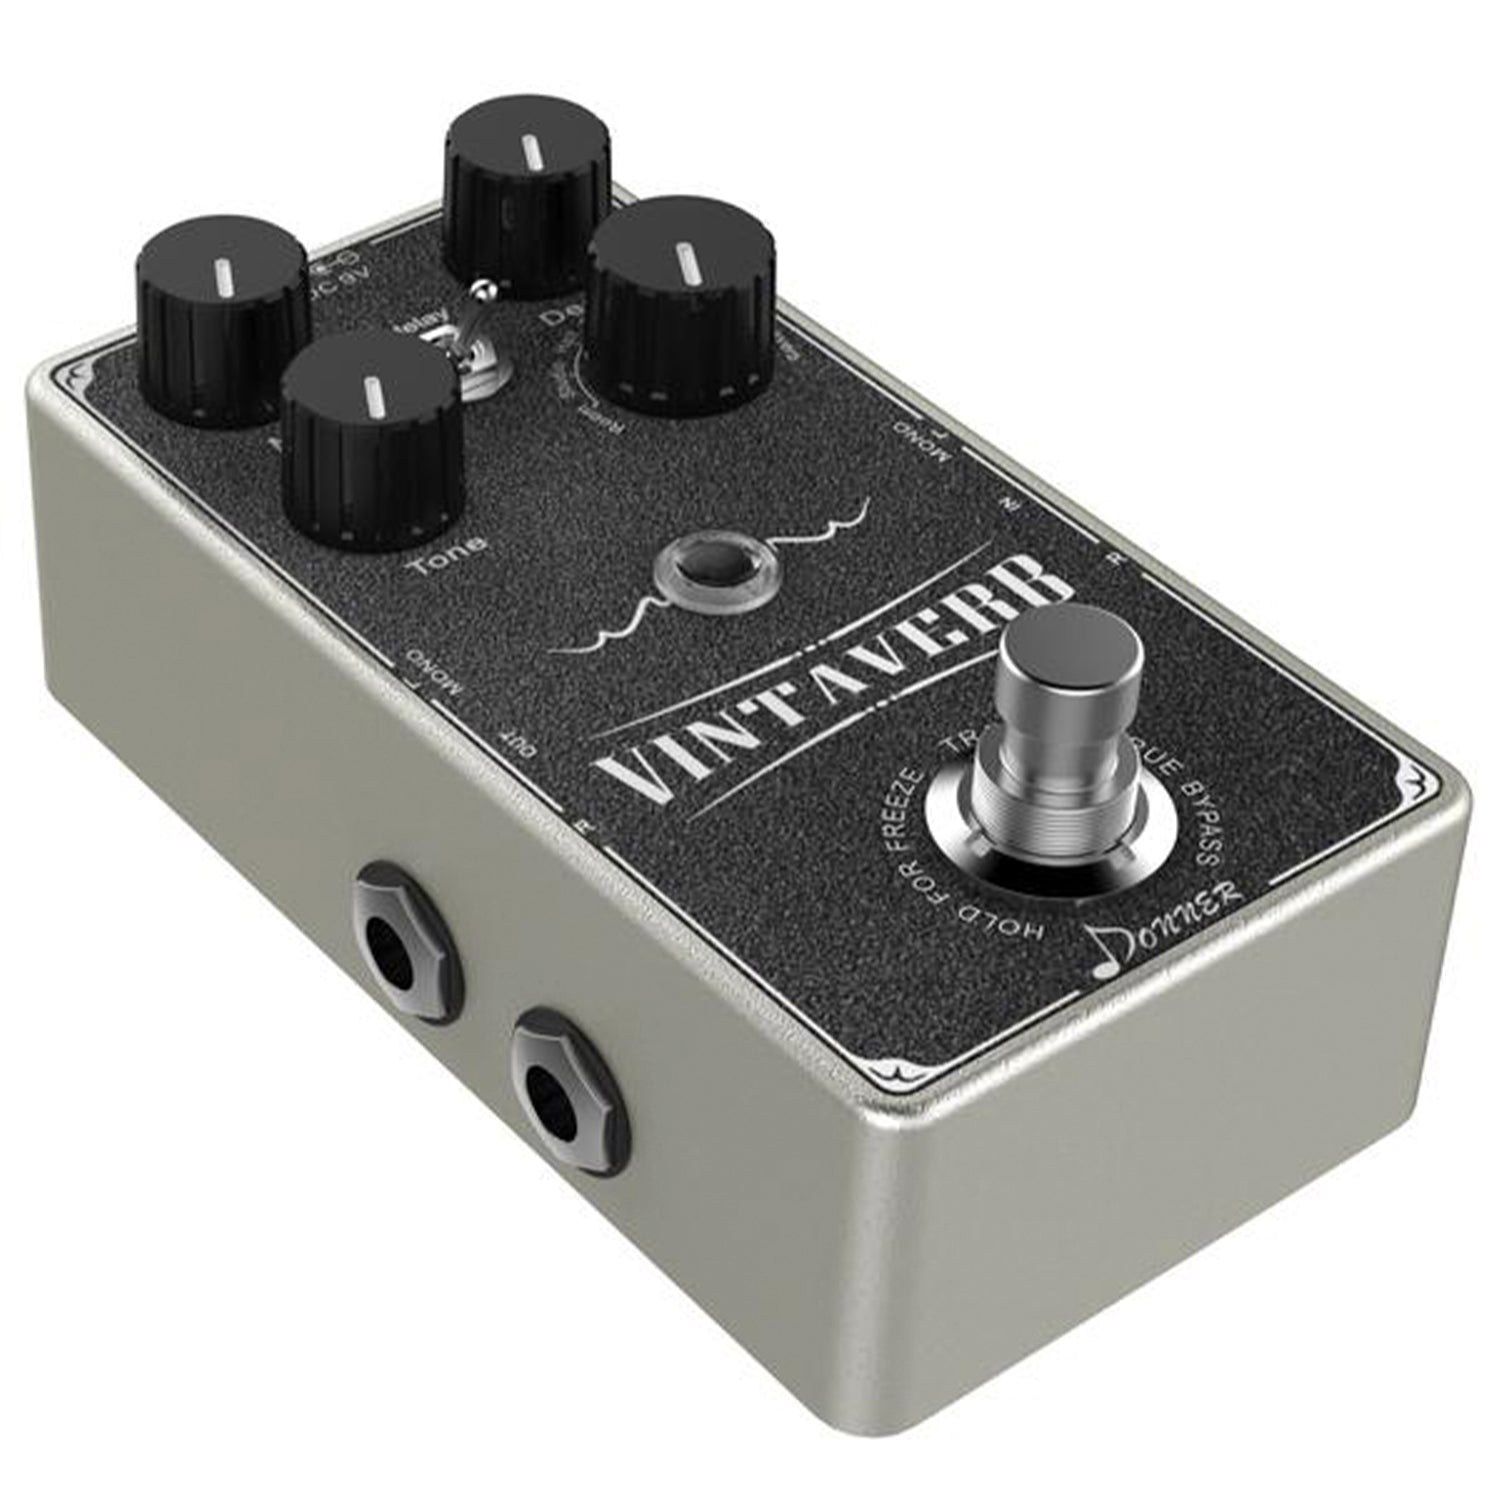 

Donner Vintaverb 7-Mode Reverb Guitar Pedal with Freeze Function True Bypass Trail On